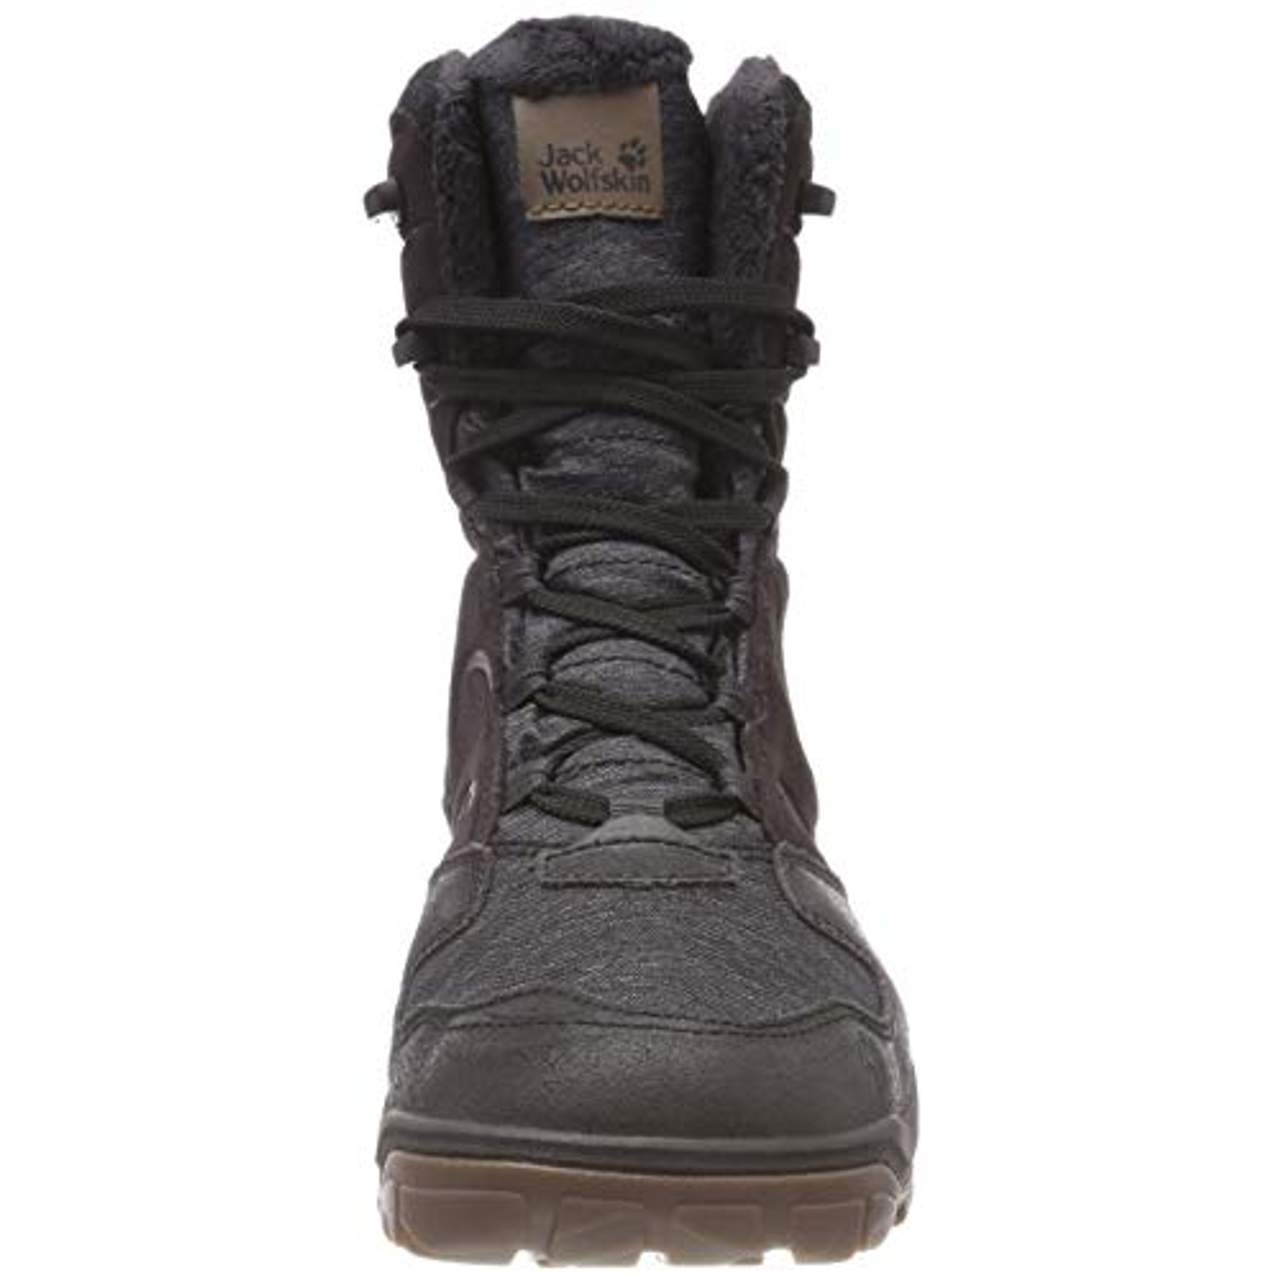 Jack Wolfskin Vancouver Texapore High M